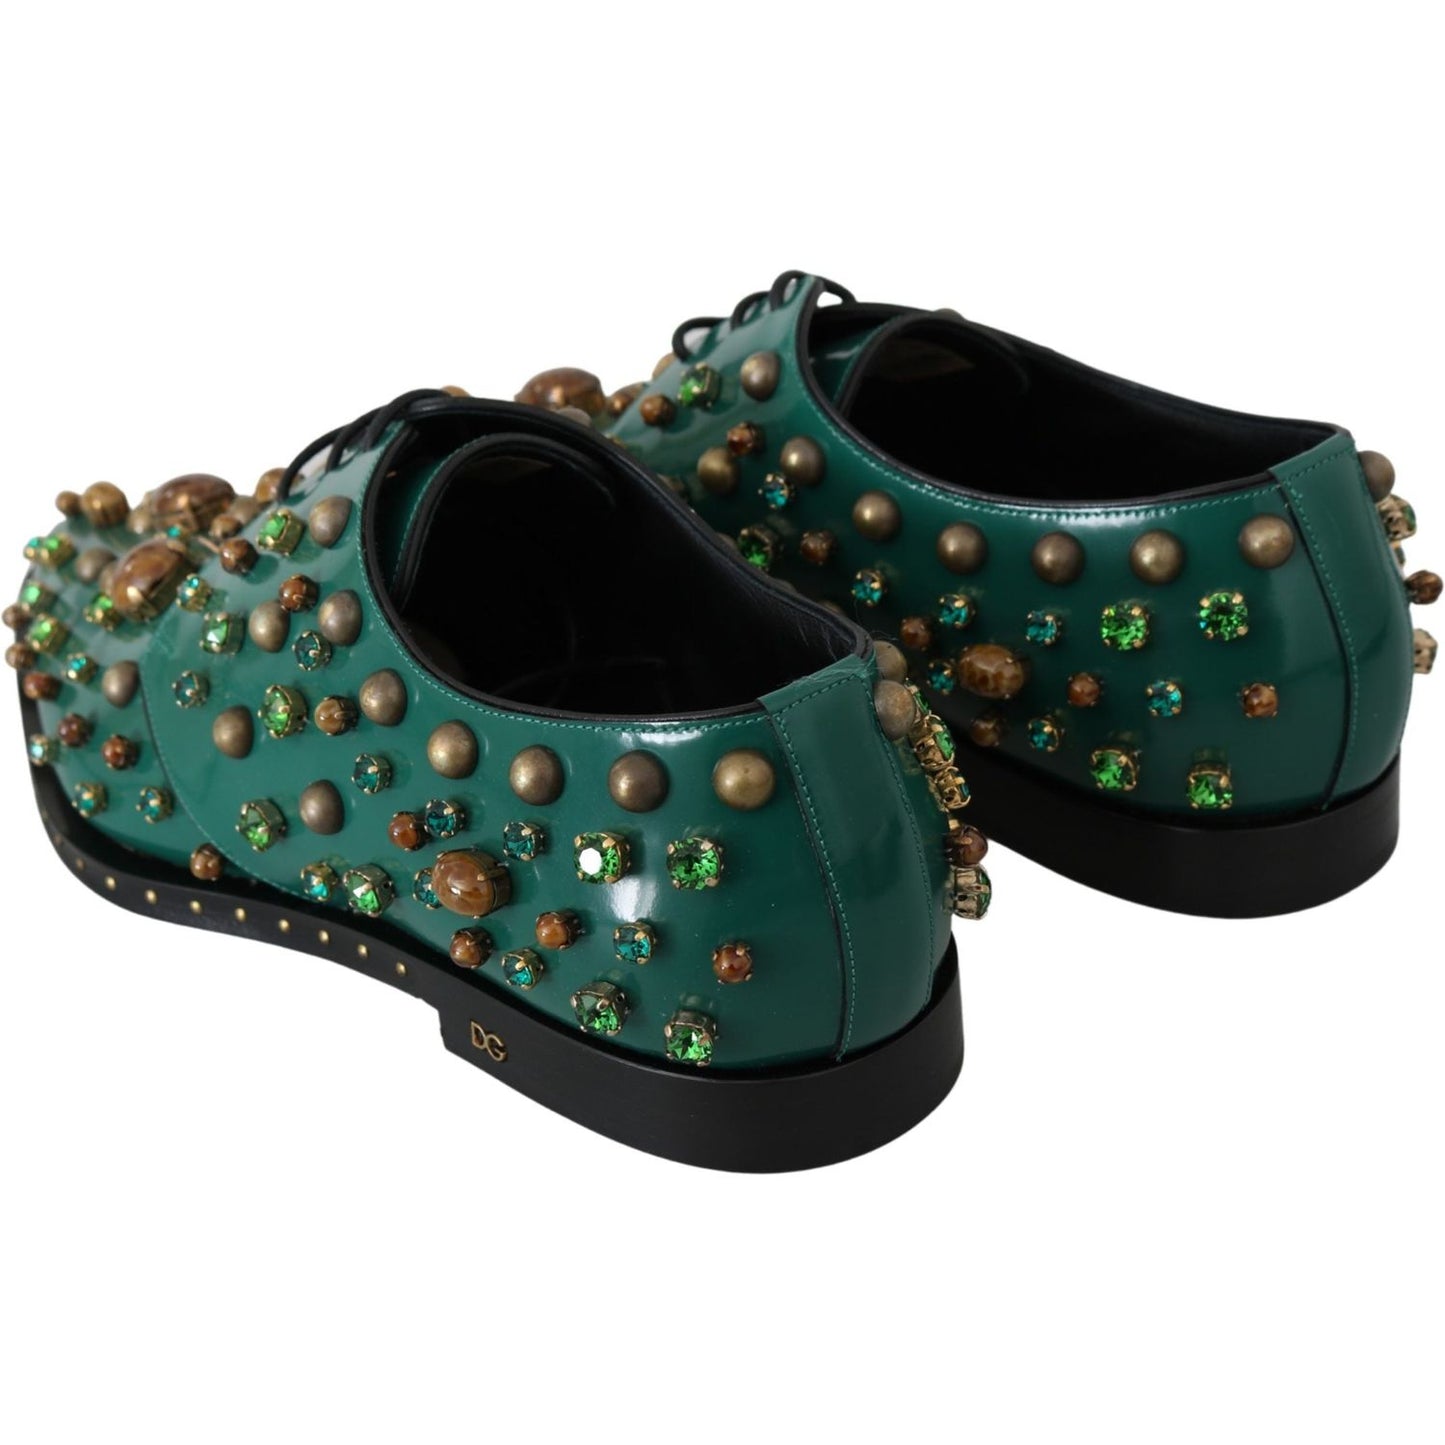 Dolce & GabbanaEmerald Leather Dress Shoes with Crystal AccentsMcRichard Designer Brands£1119.00